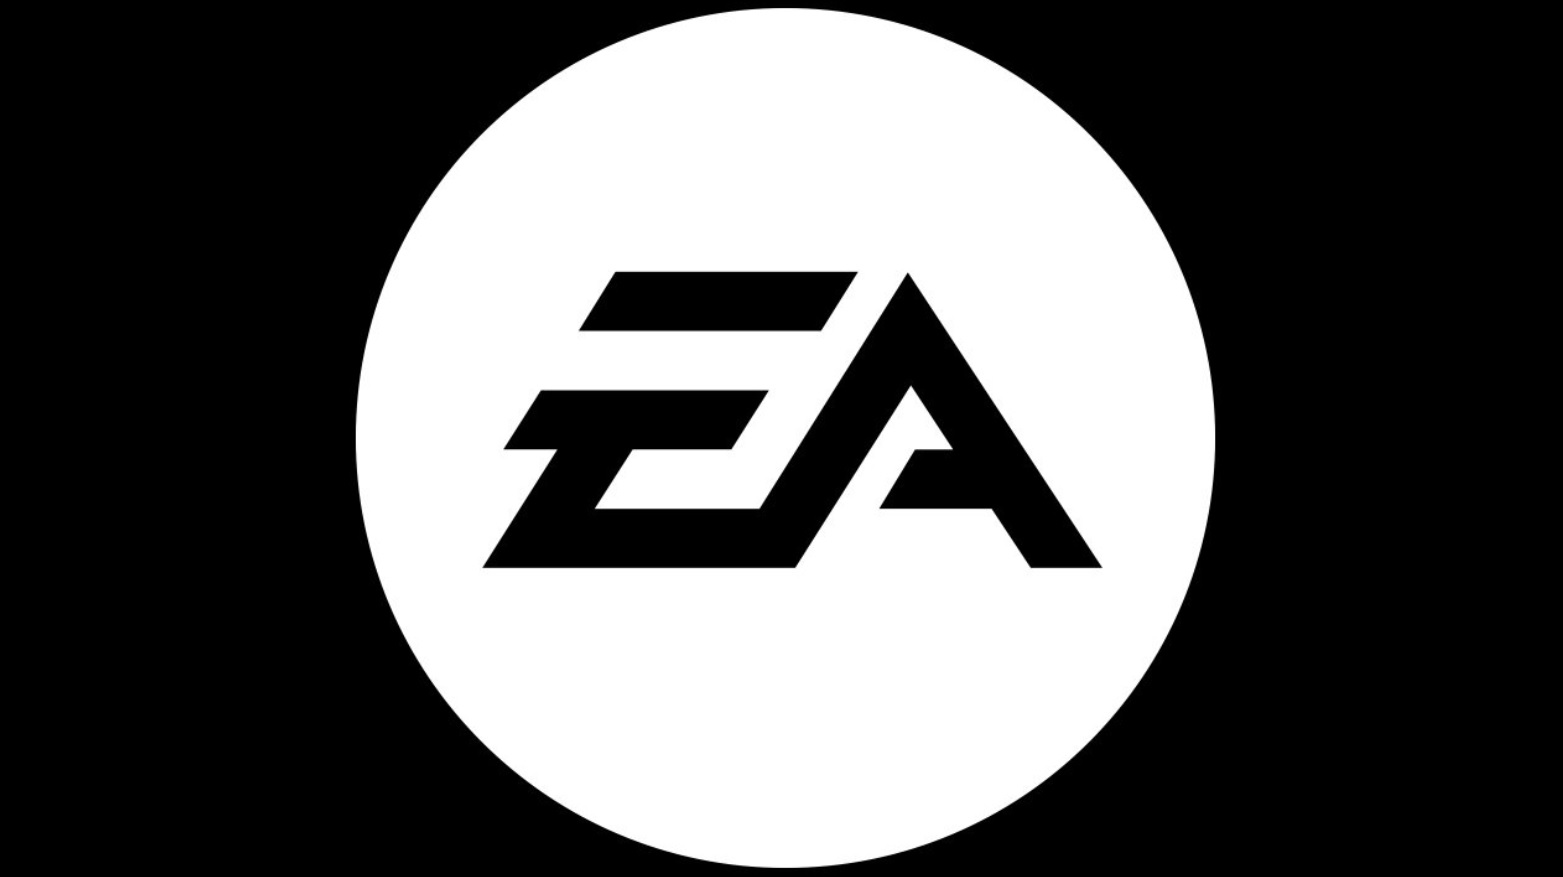 EA maintains independence: CNBC denied rumors of purchase by Amazon